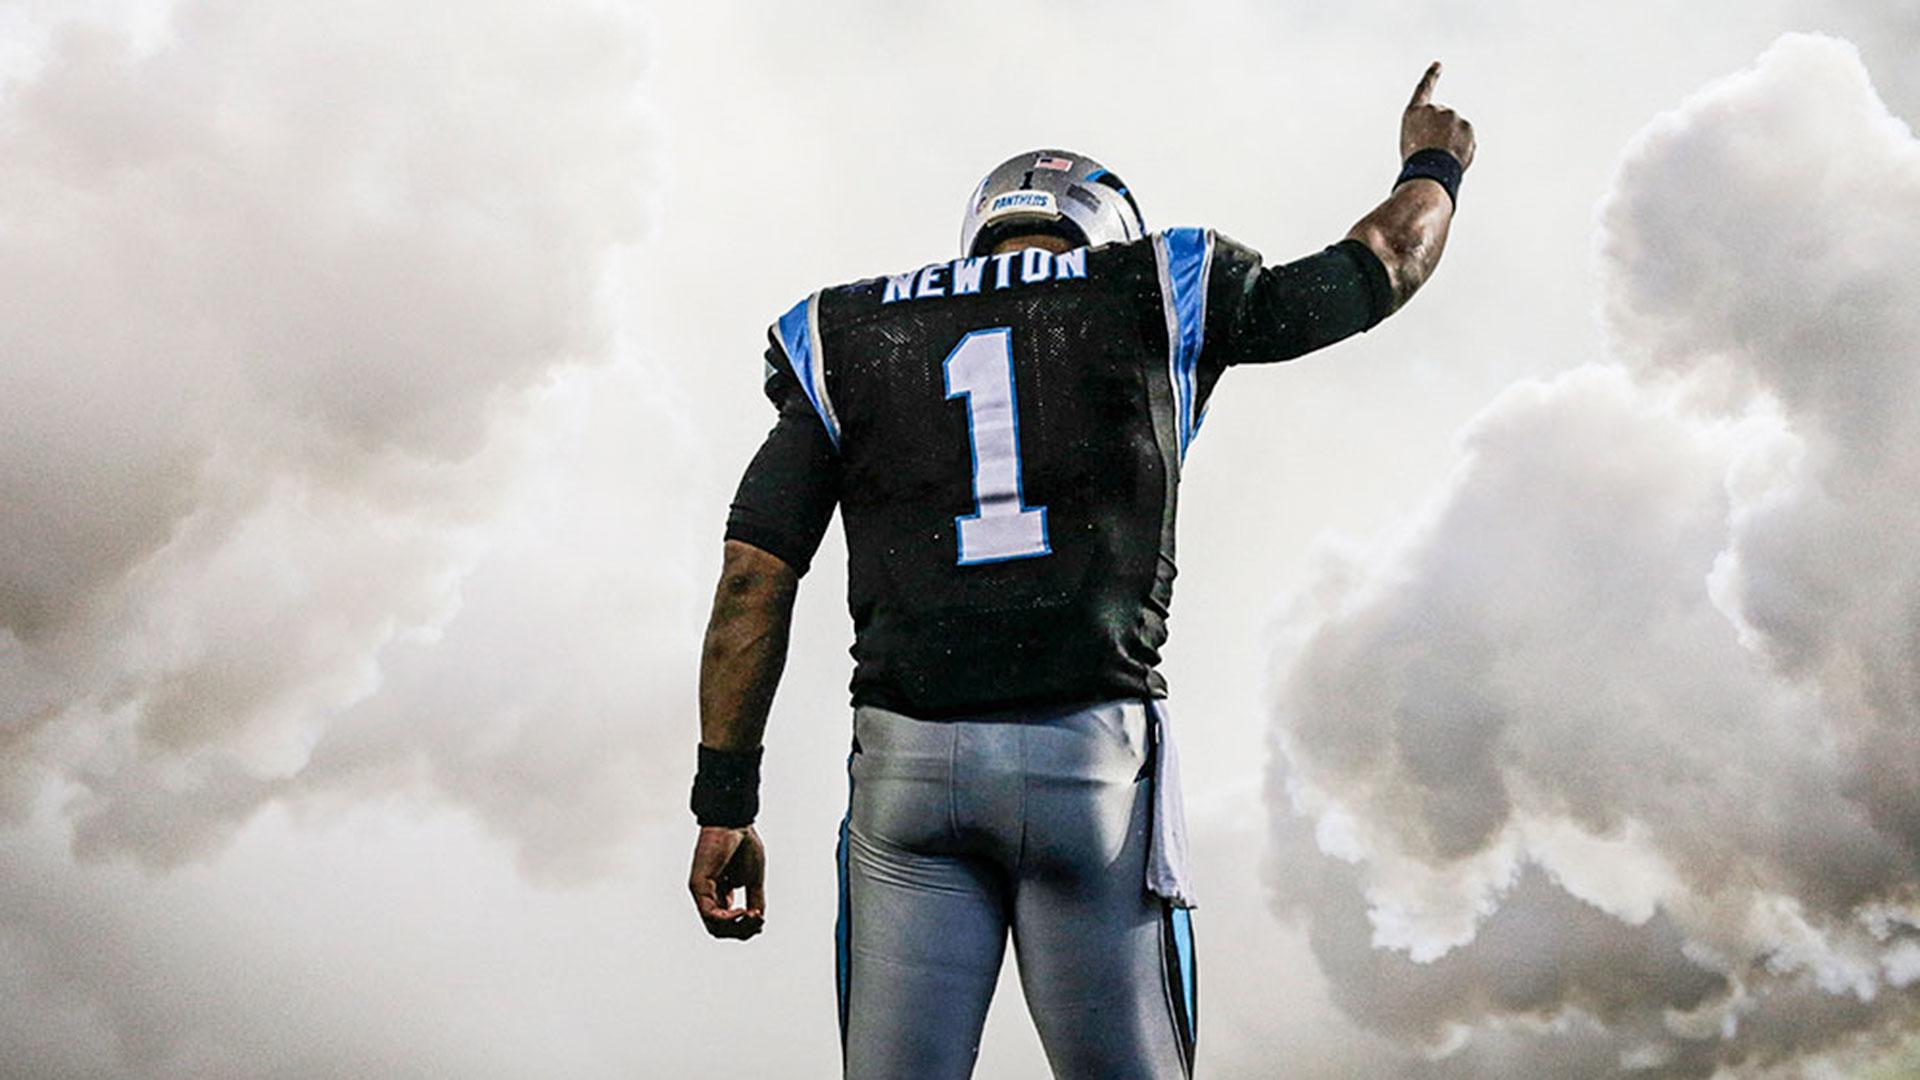 HD desktop wallpaper of Cam Newton with his back turned, jersey number 1 visible, pointing upwards against a cloudy sky background.